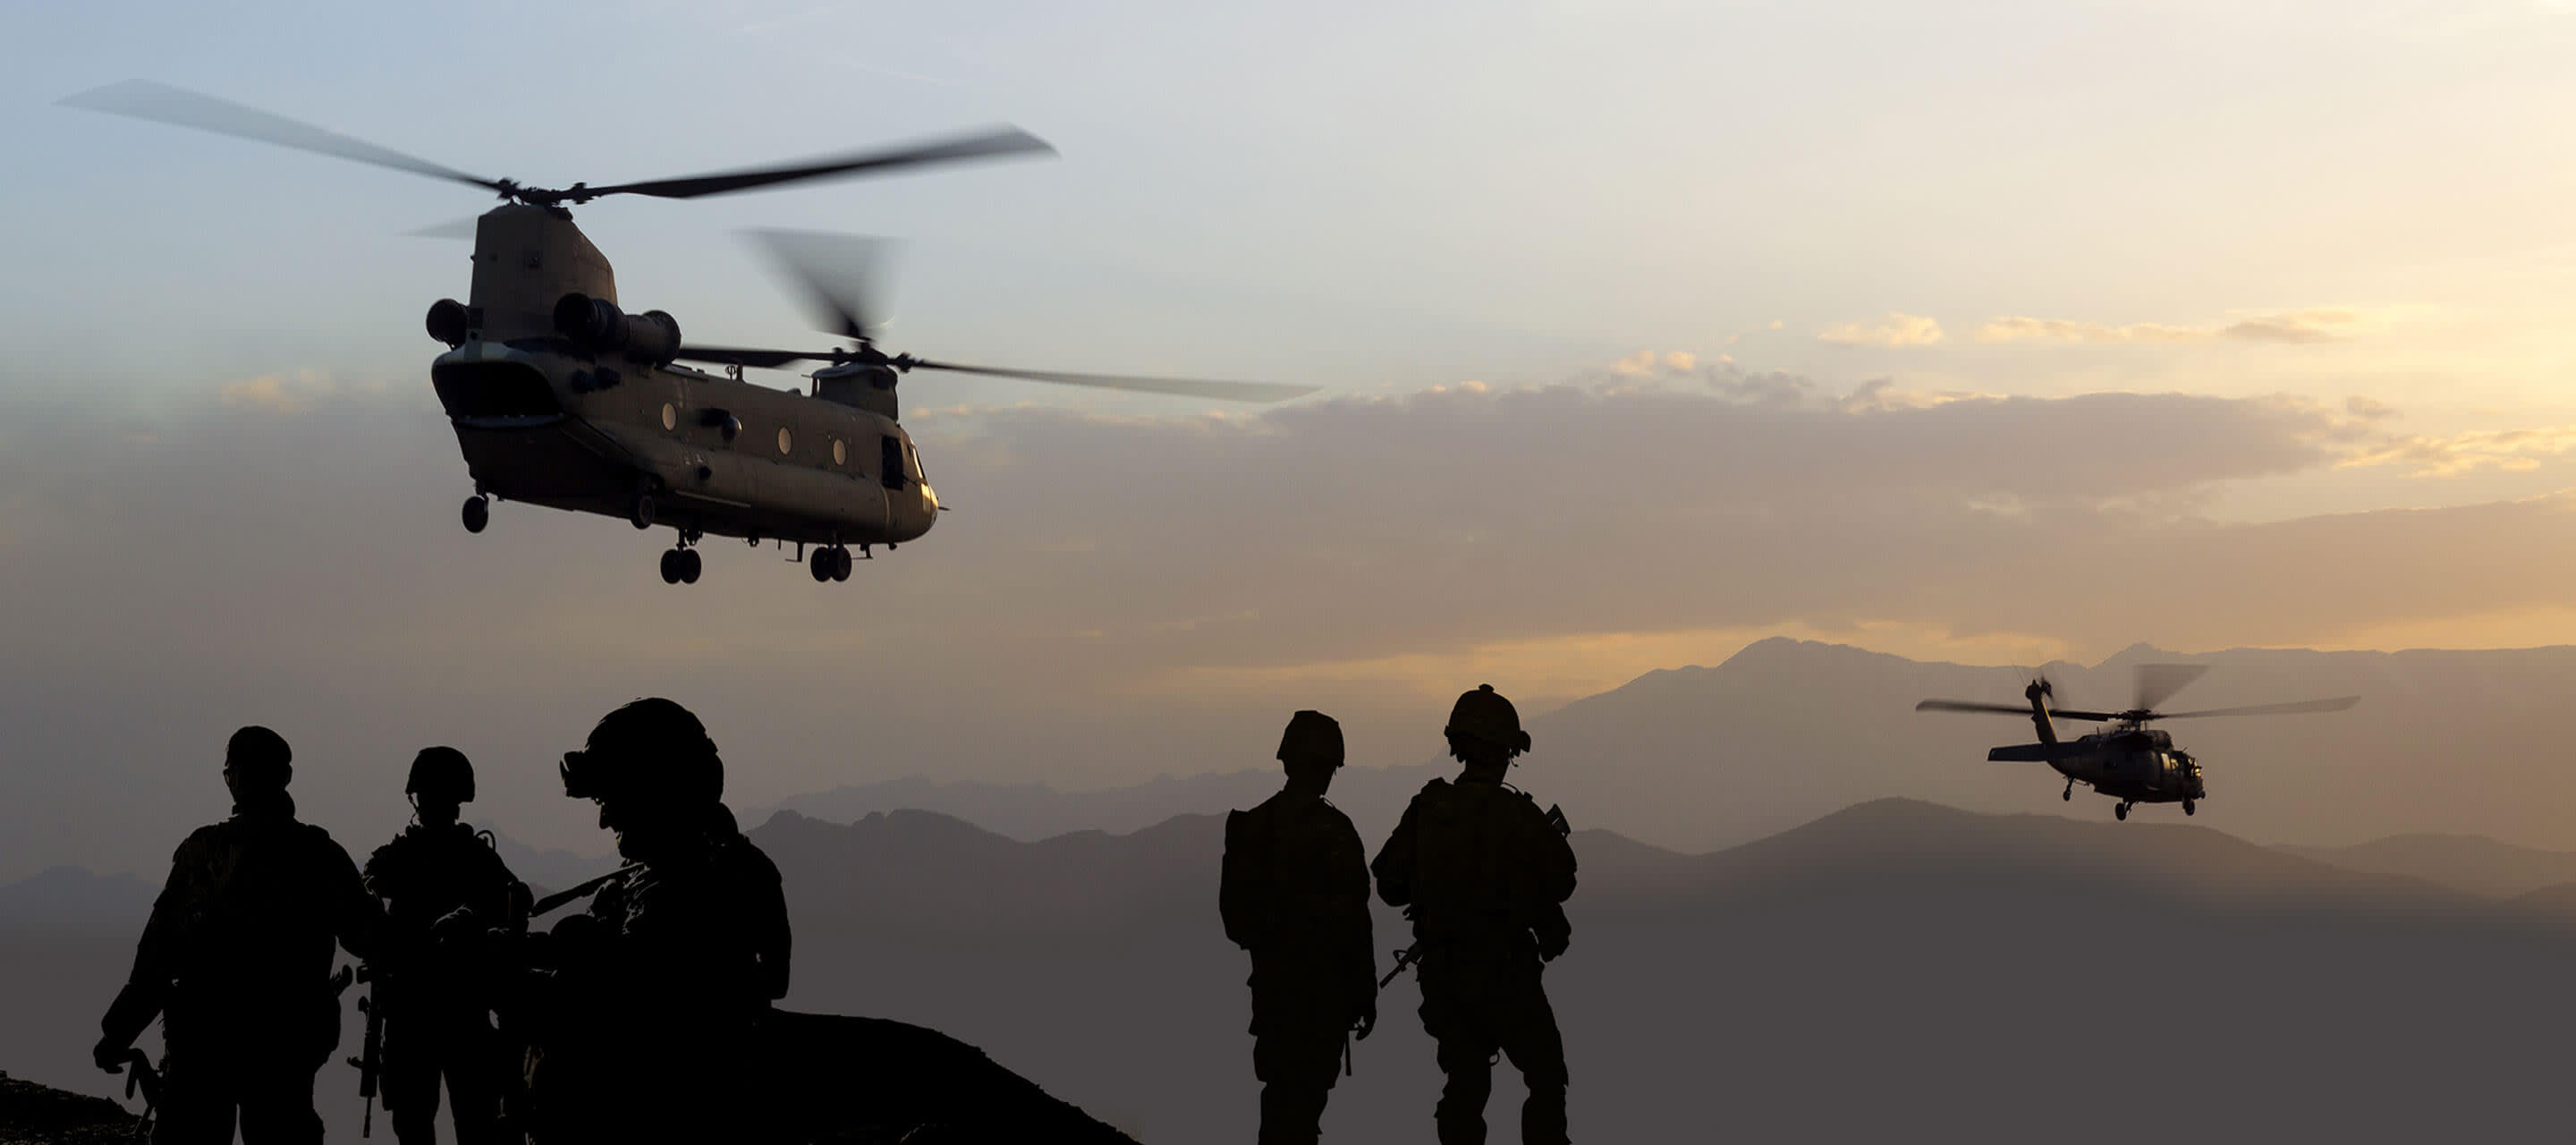 Shadows of soldiers and helicopters in mountains.